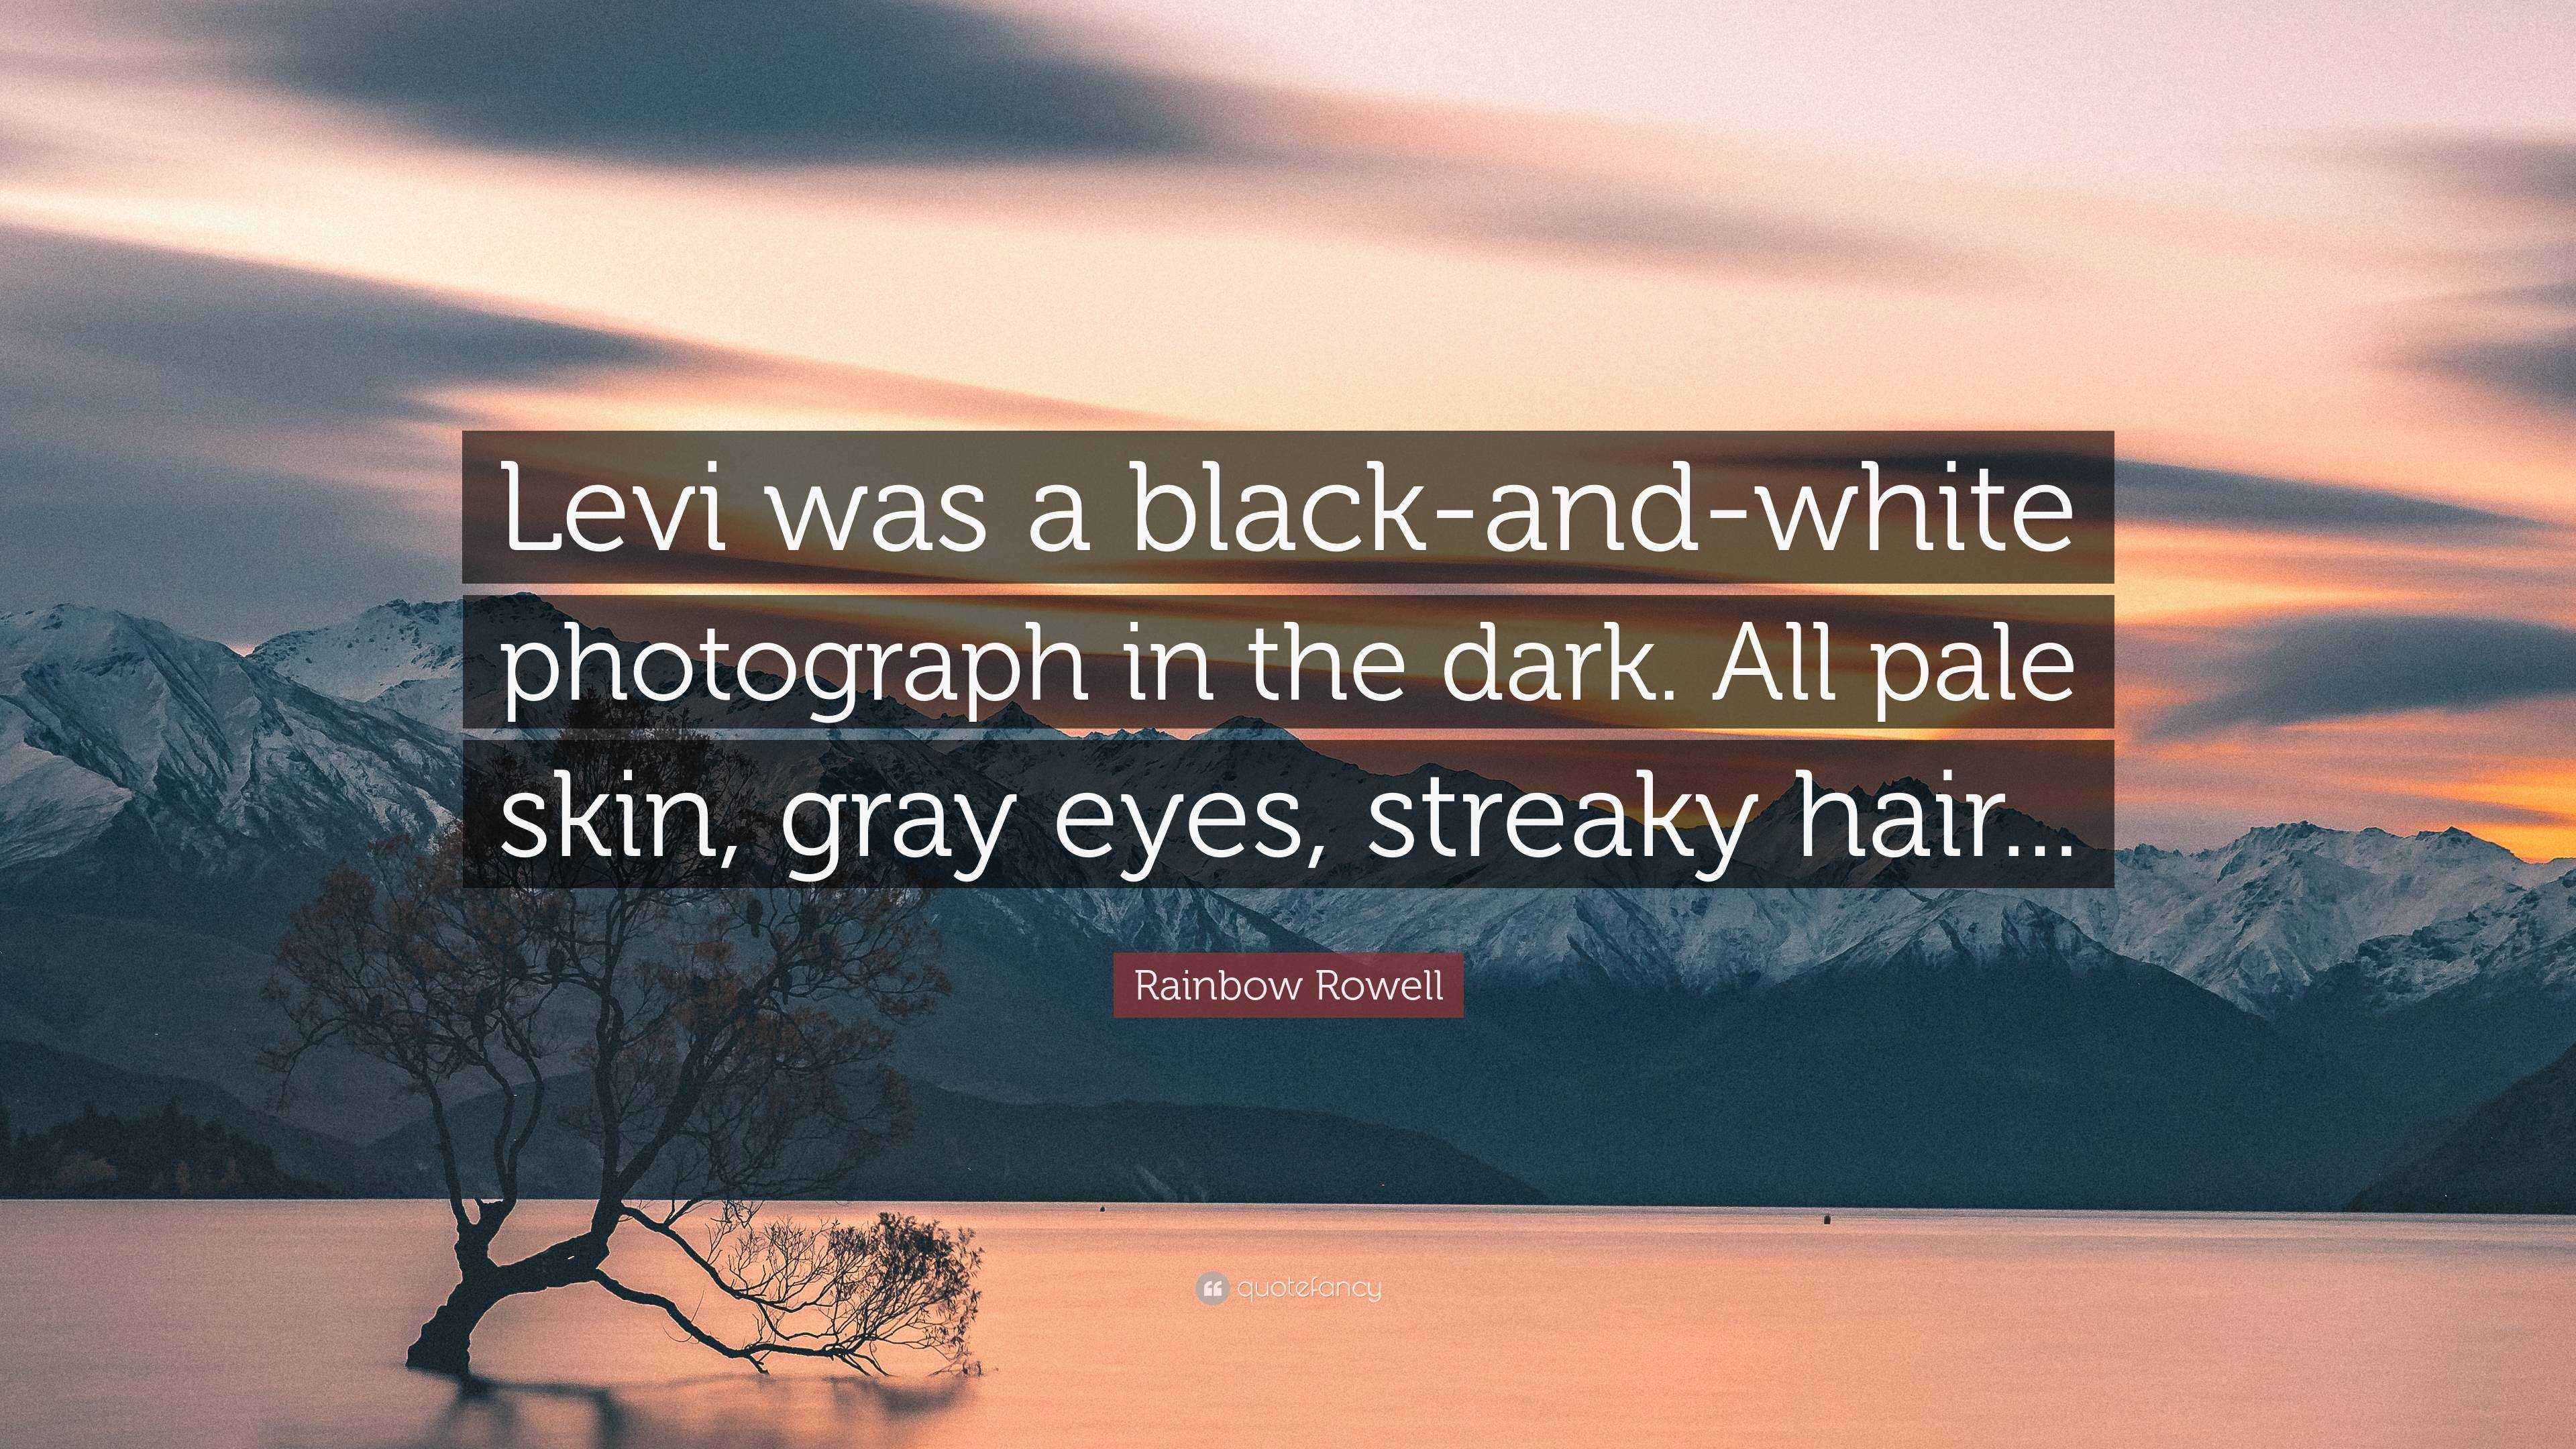 Rainbow Rowell Quote: “Levi was a black-and-white photograph in the dark.  All pale skin,